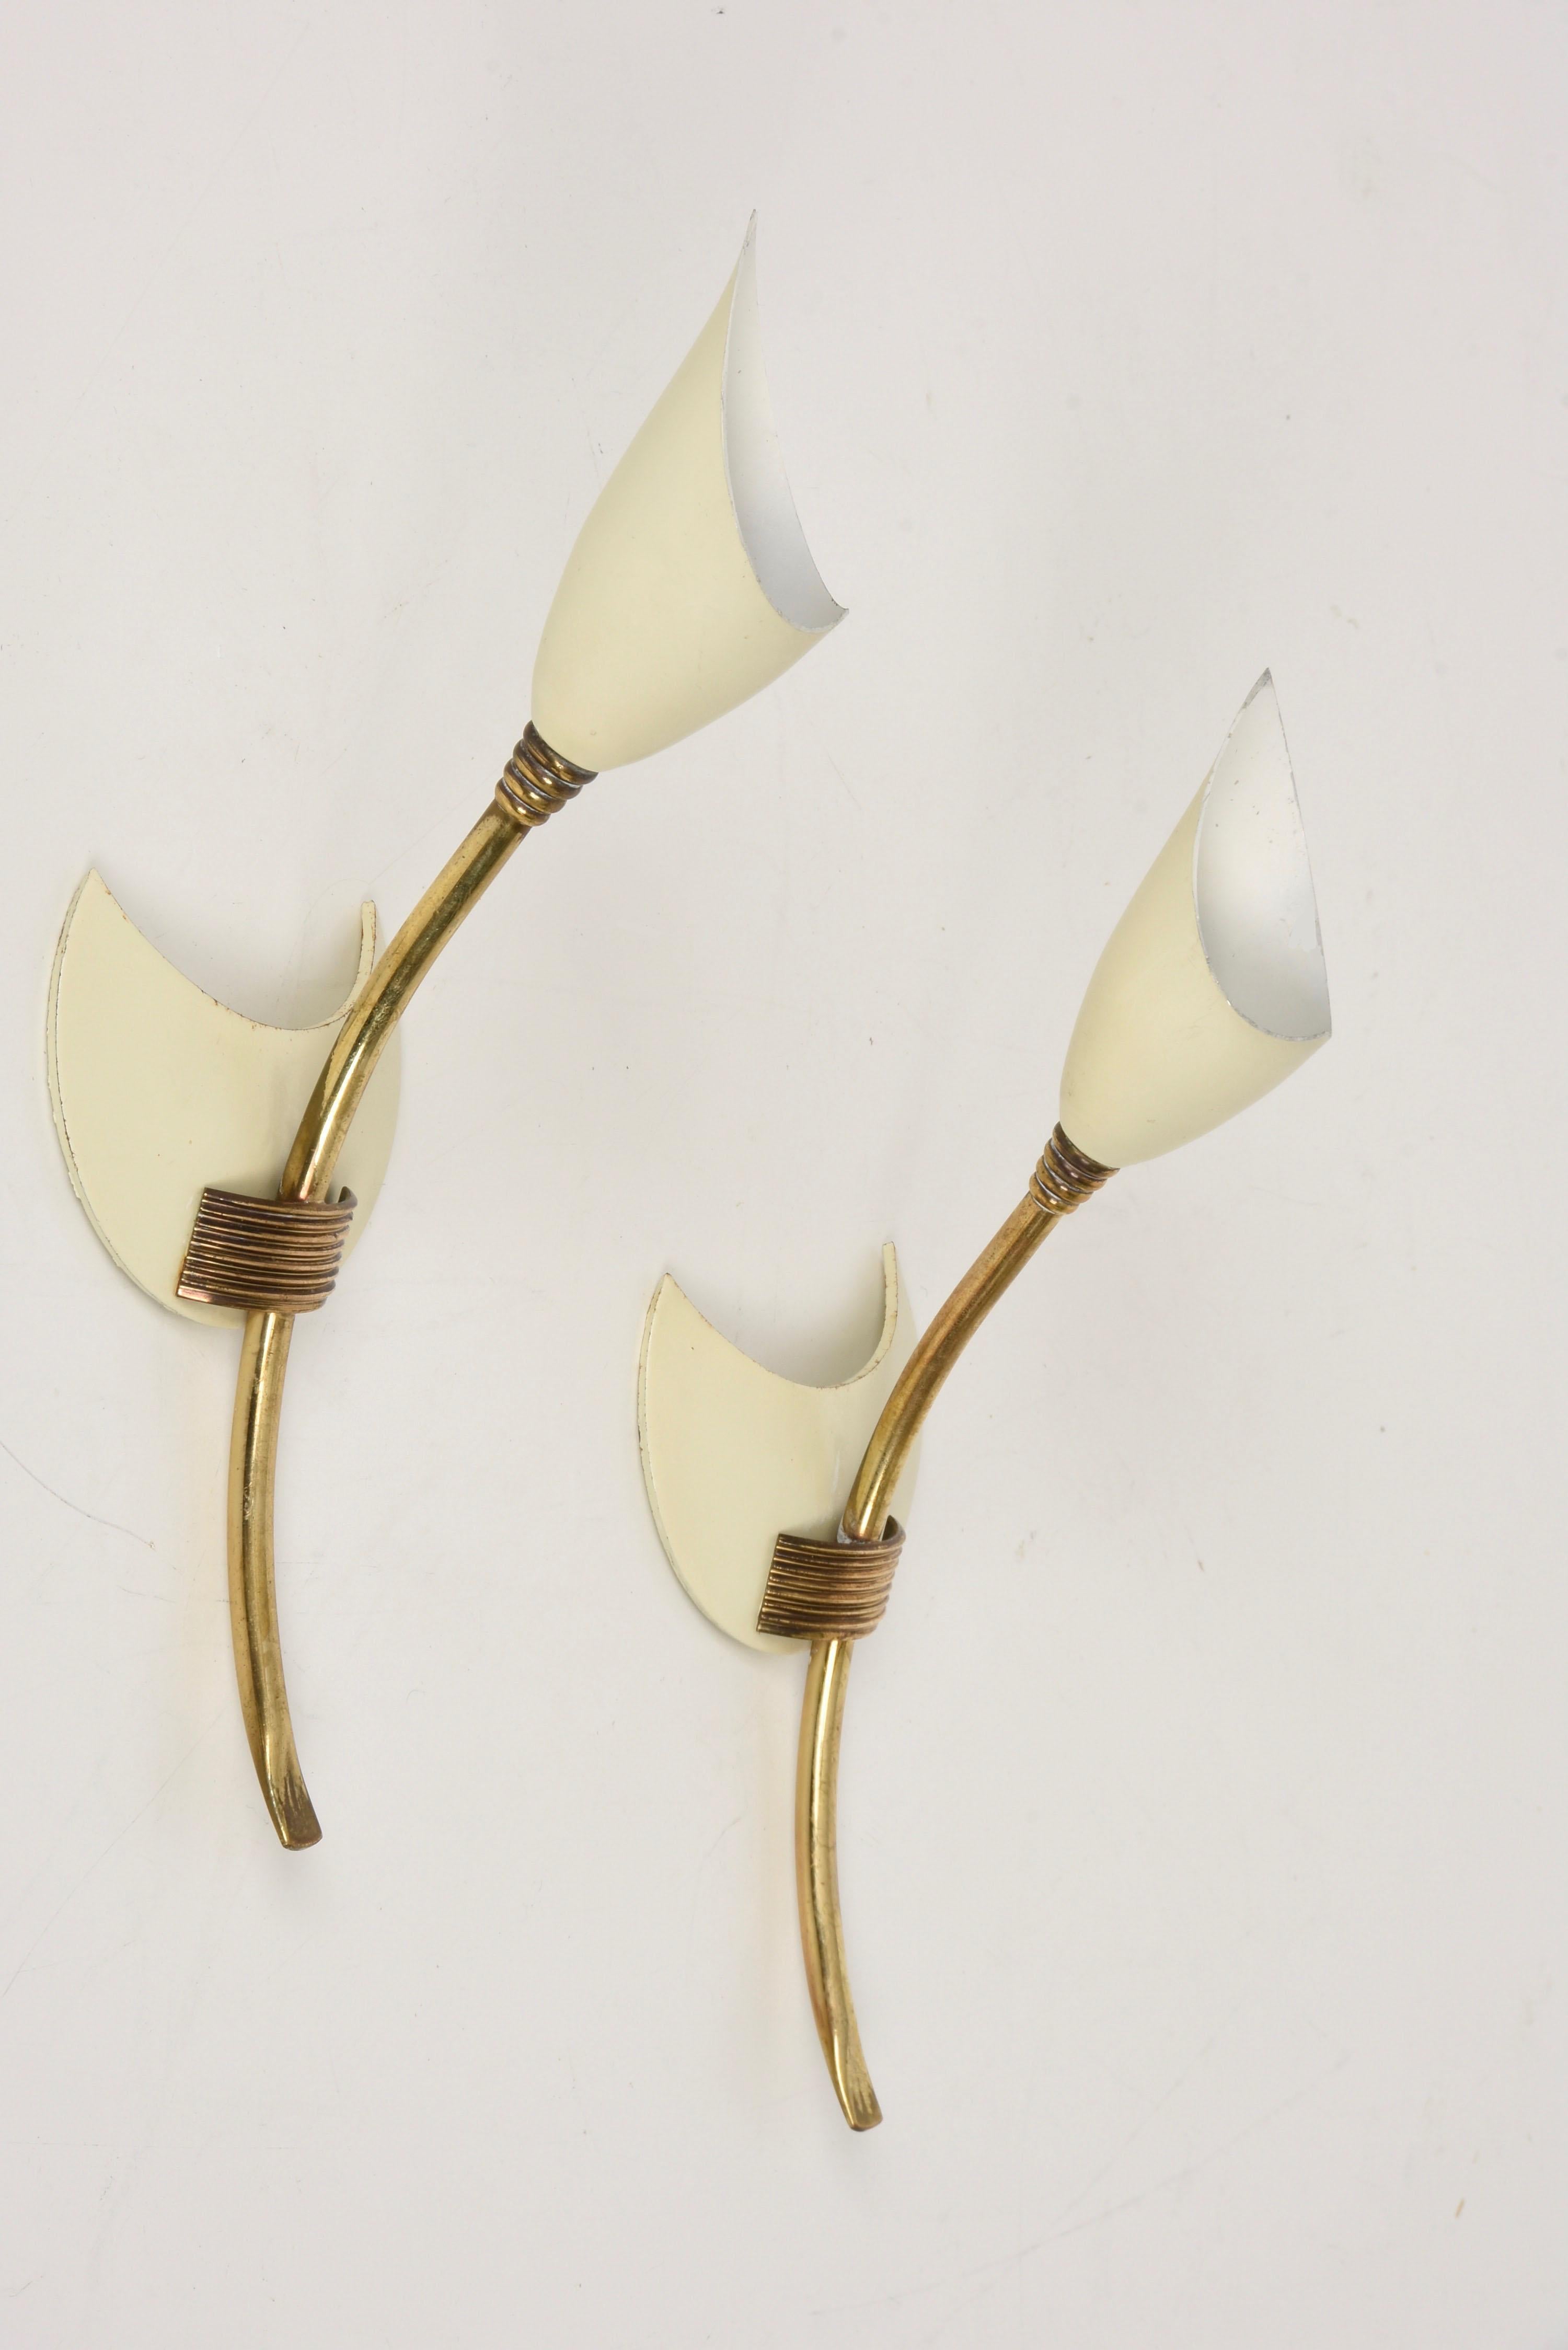 Pair of GCME Midcentury Brass and Enamelled Aluminum Italian Tulip Sconces 1950s For Sale 6